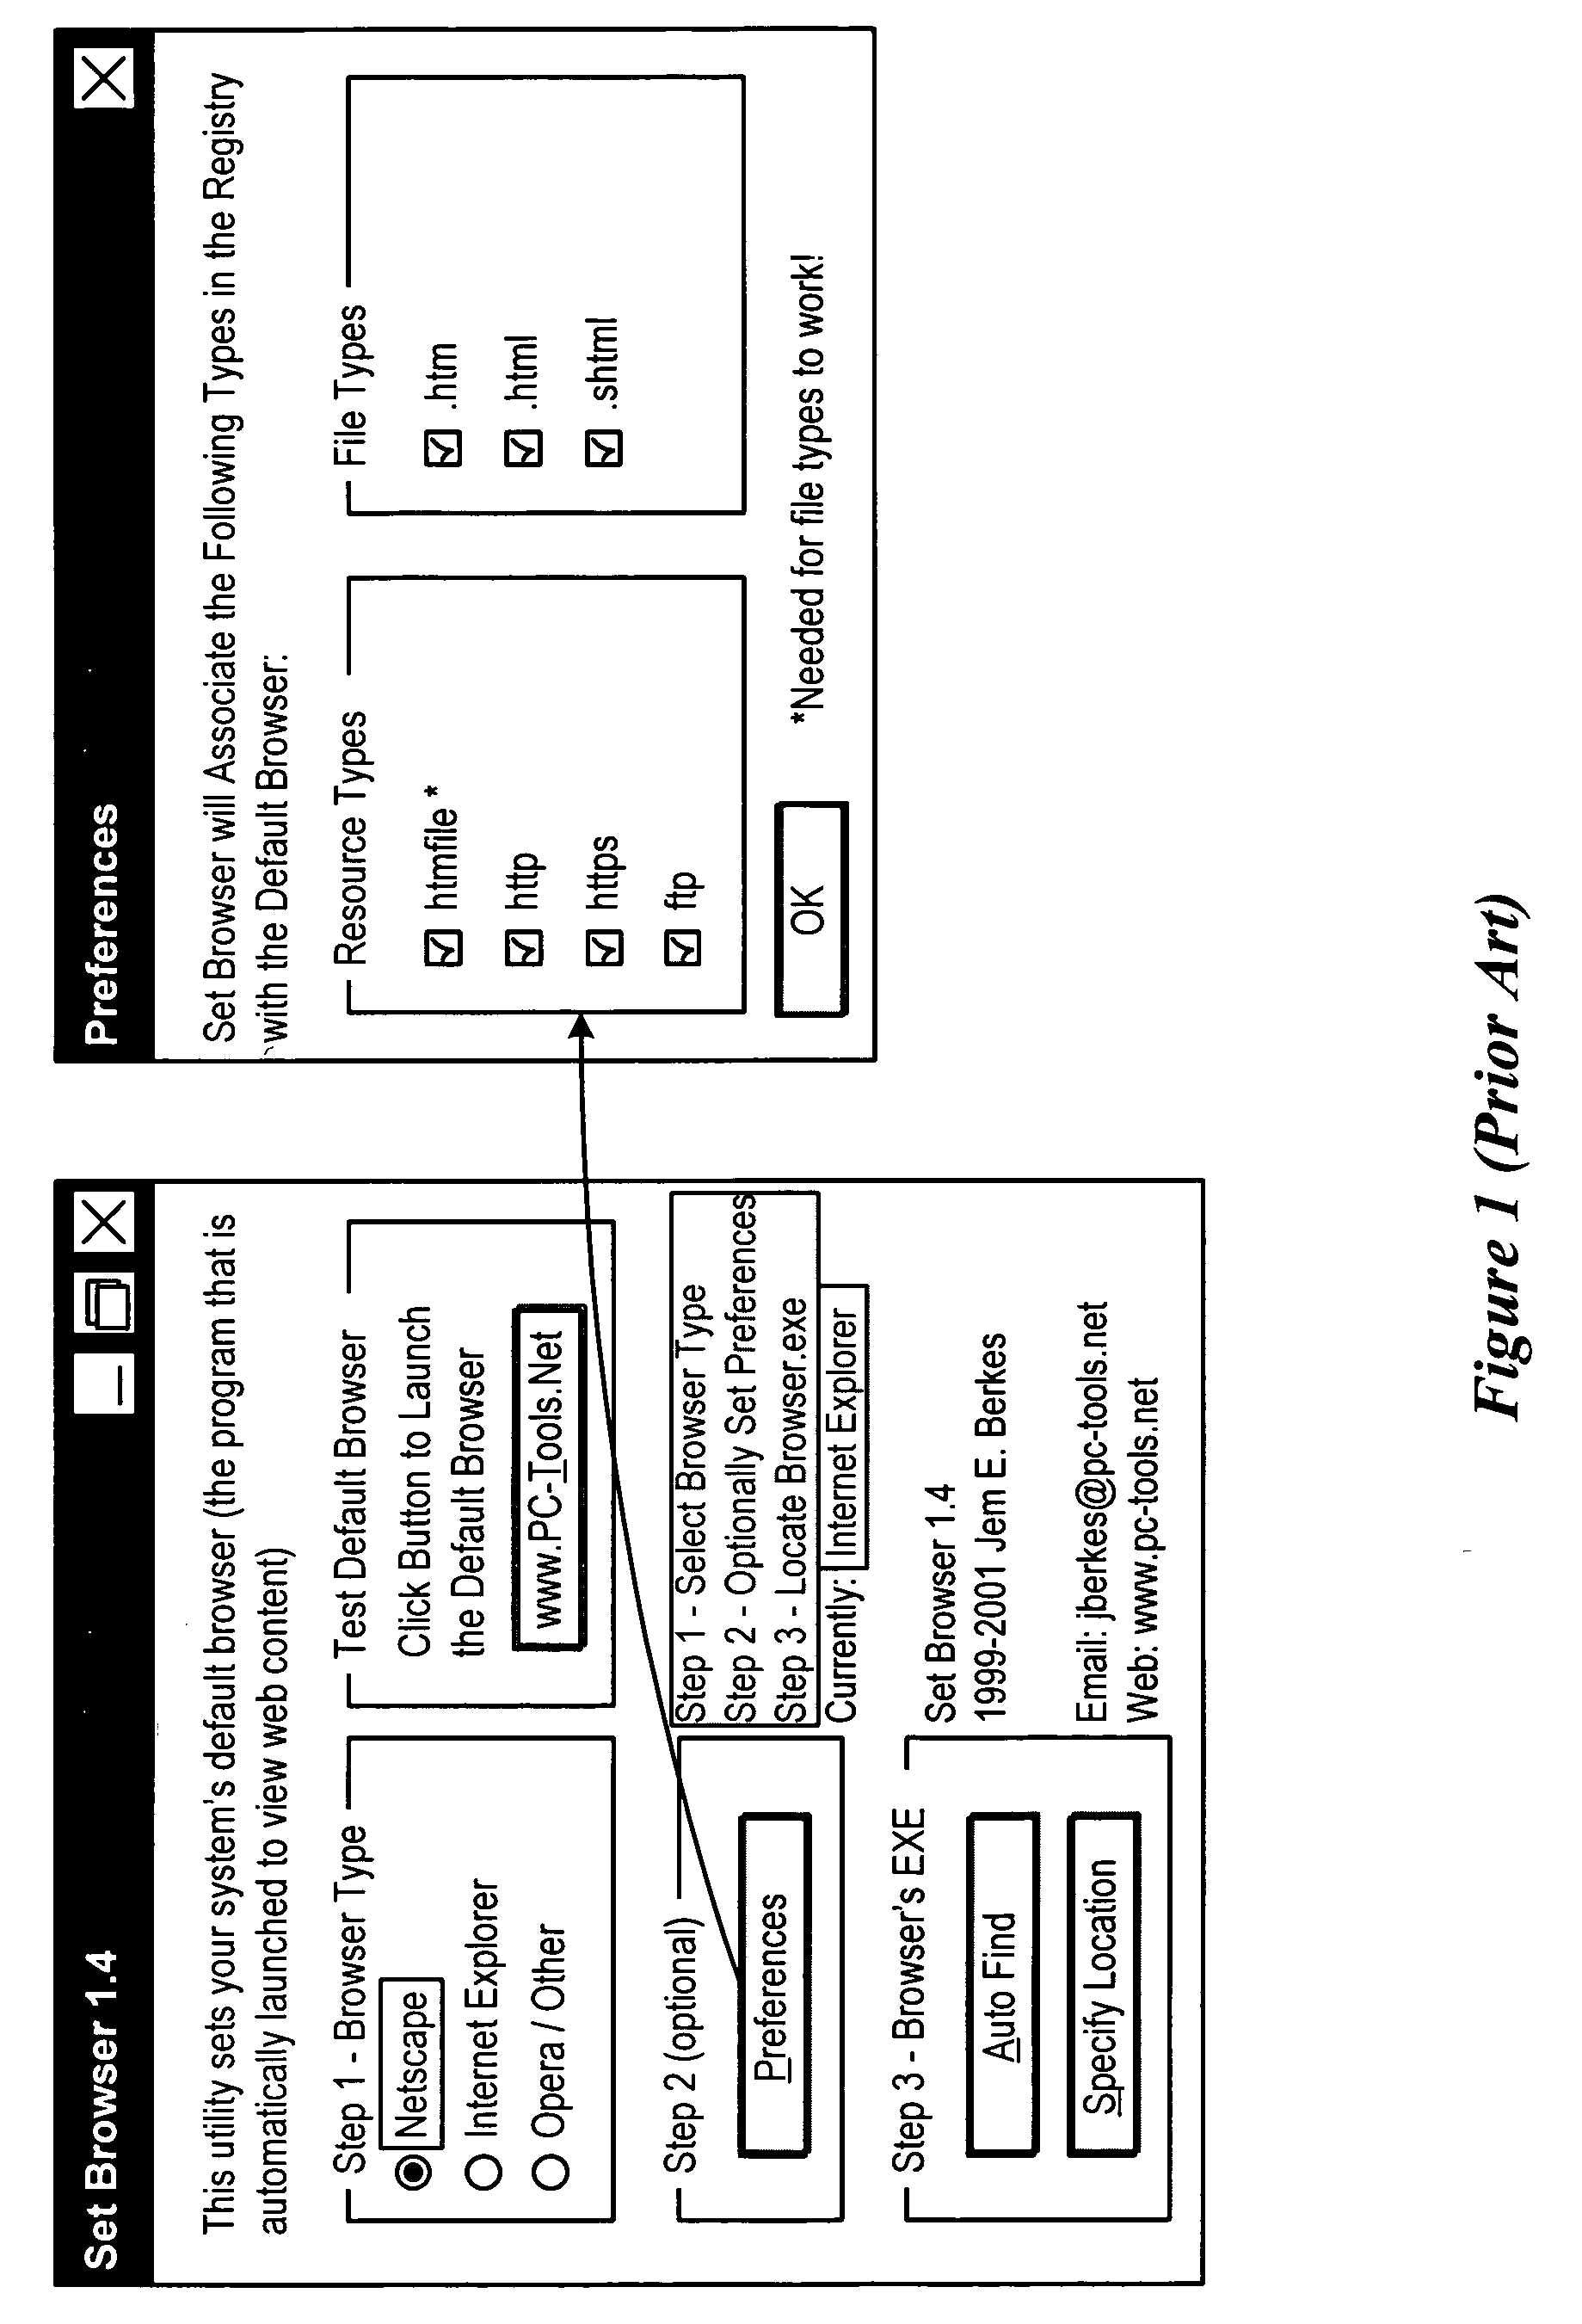 Central internet browser control for multiple browsers enabled system